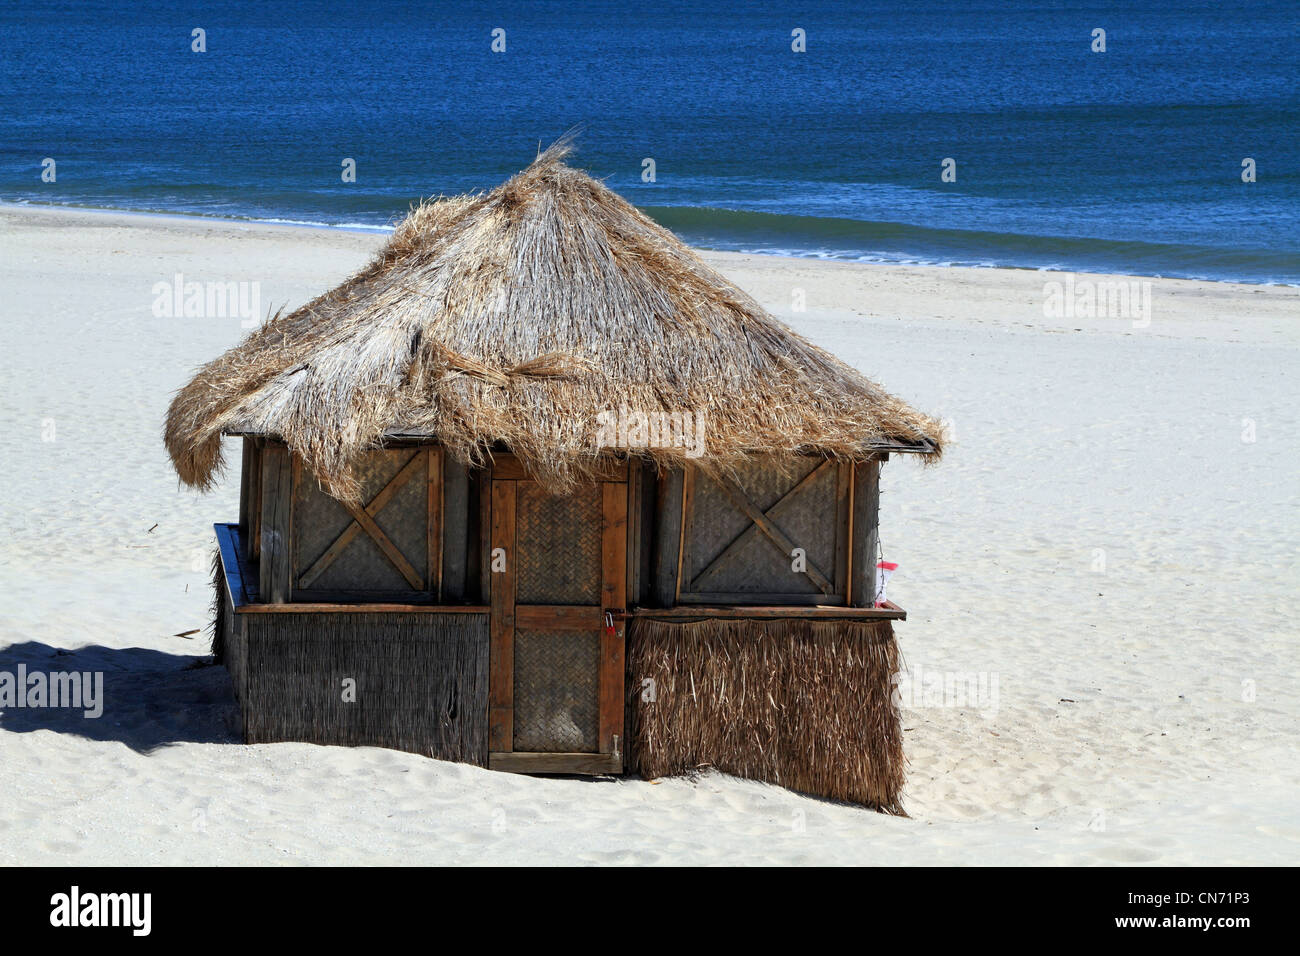 A closed beach hut on the beach in Long Branch, New Jersey, USA Stock Photo